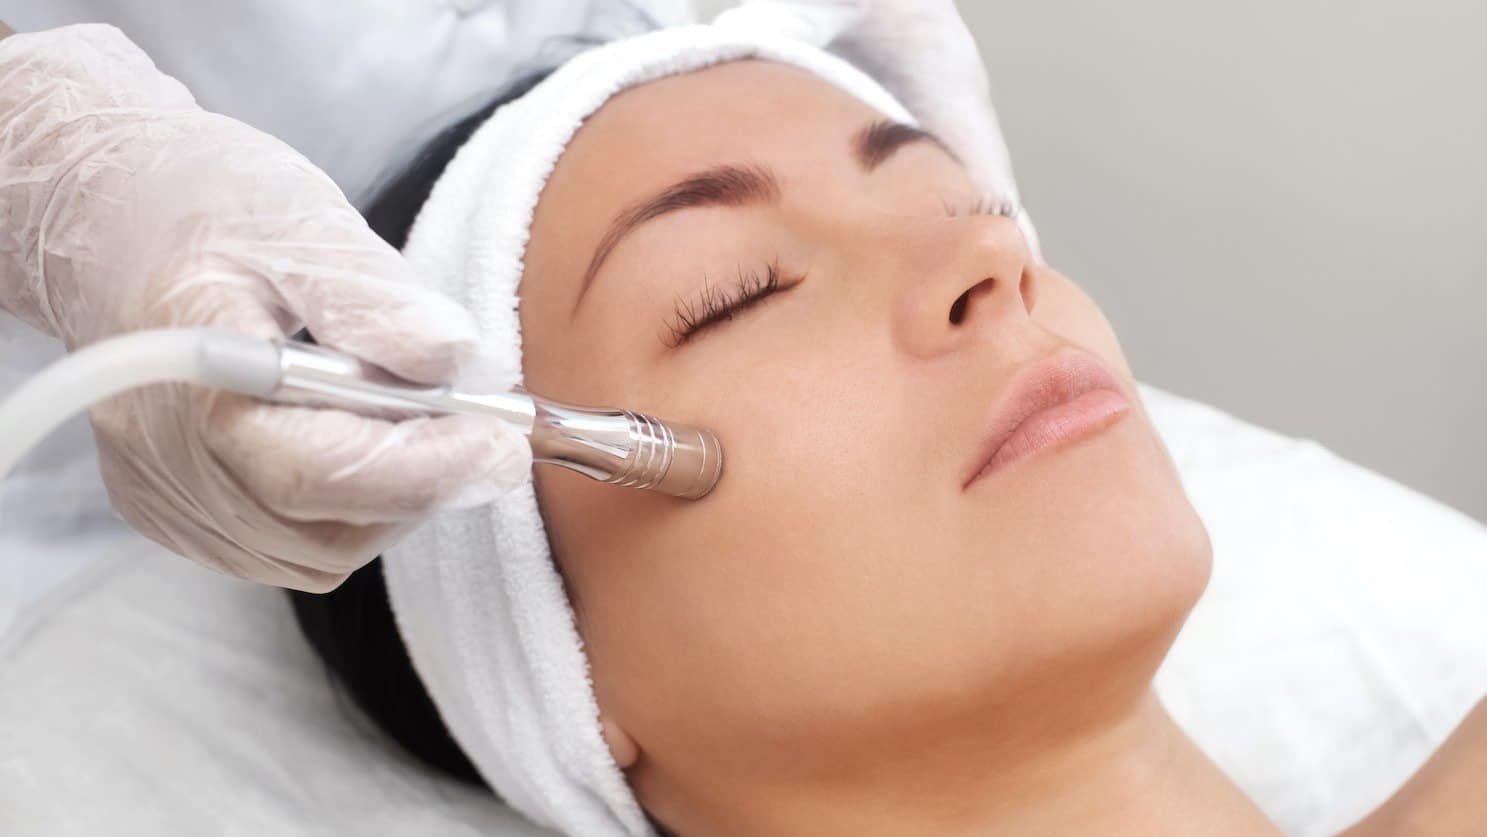 Microdermabrasion Treatment To Erase Wrinkles And Smooth the Texture Of The Skin